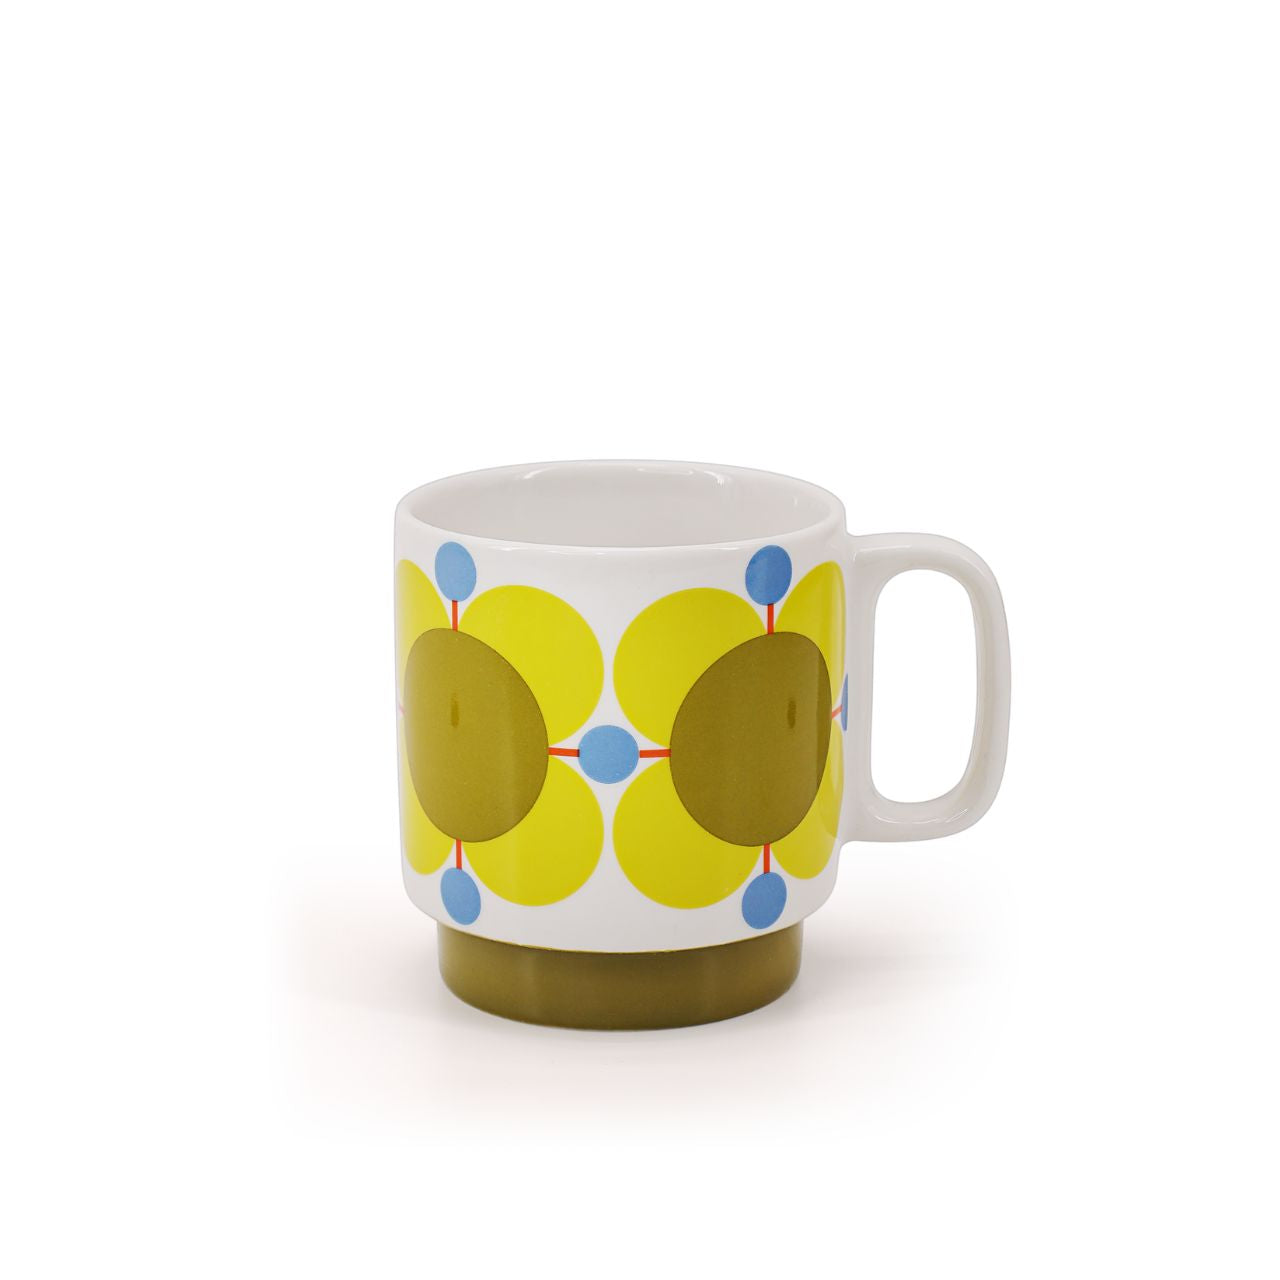 Tipperary Orla Kiely Atomic Flower Sky Sunflower Set 2 Stacking Mugs  DESIGNED IN THE UK BY ORLA KIELY: This set of two mugs has a unique 'Atomic Flower' print and is designed to be stacked.  Each mug is stamped with an authentic Orla Kiely logo.